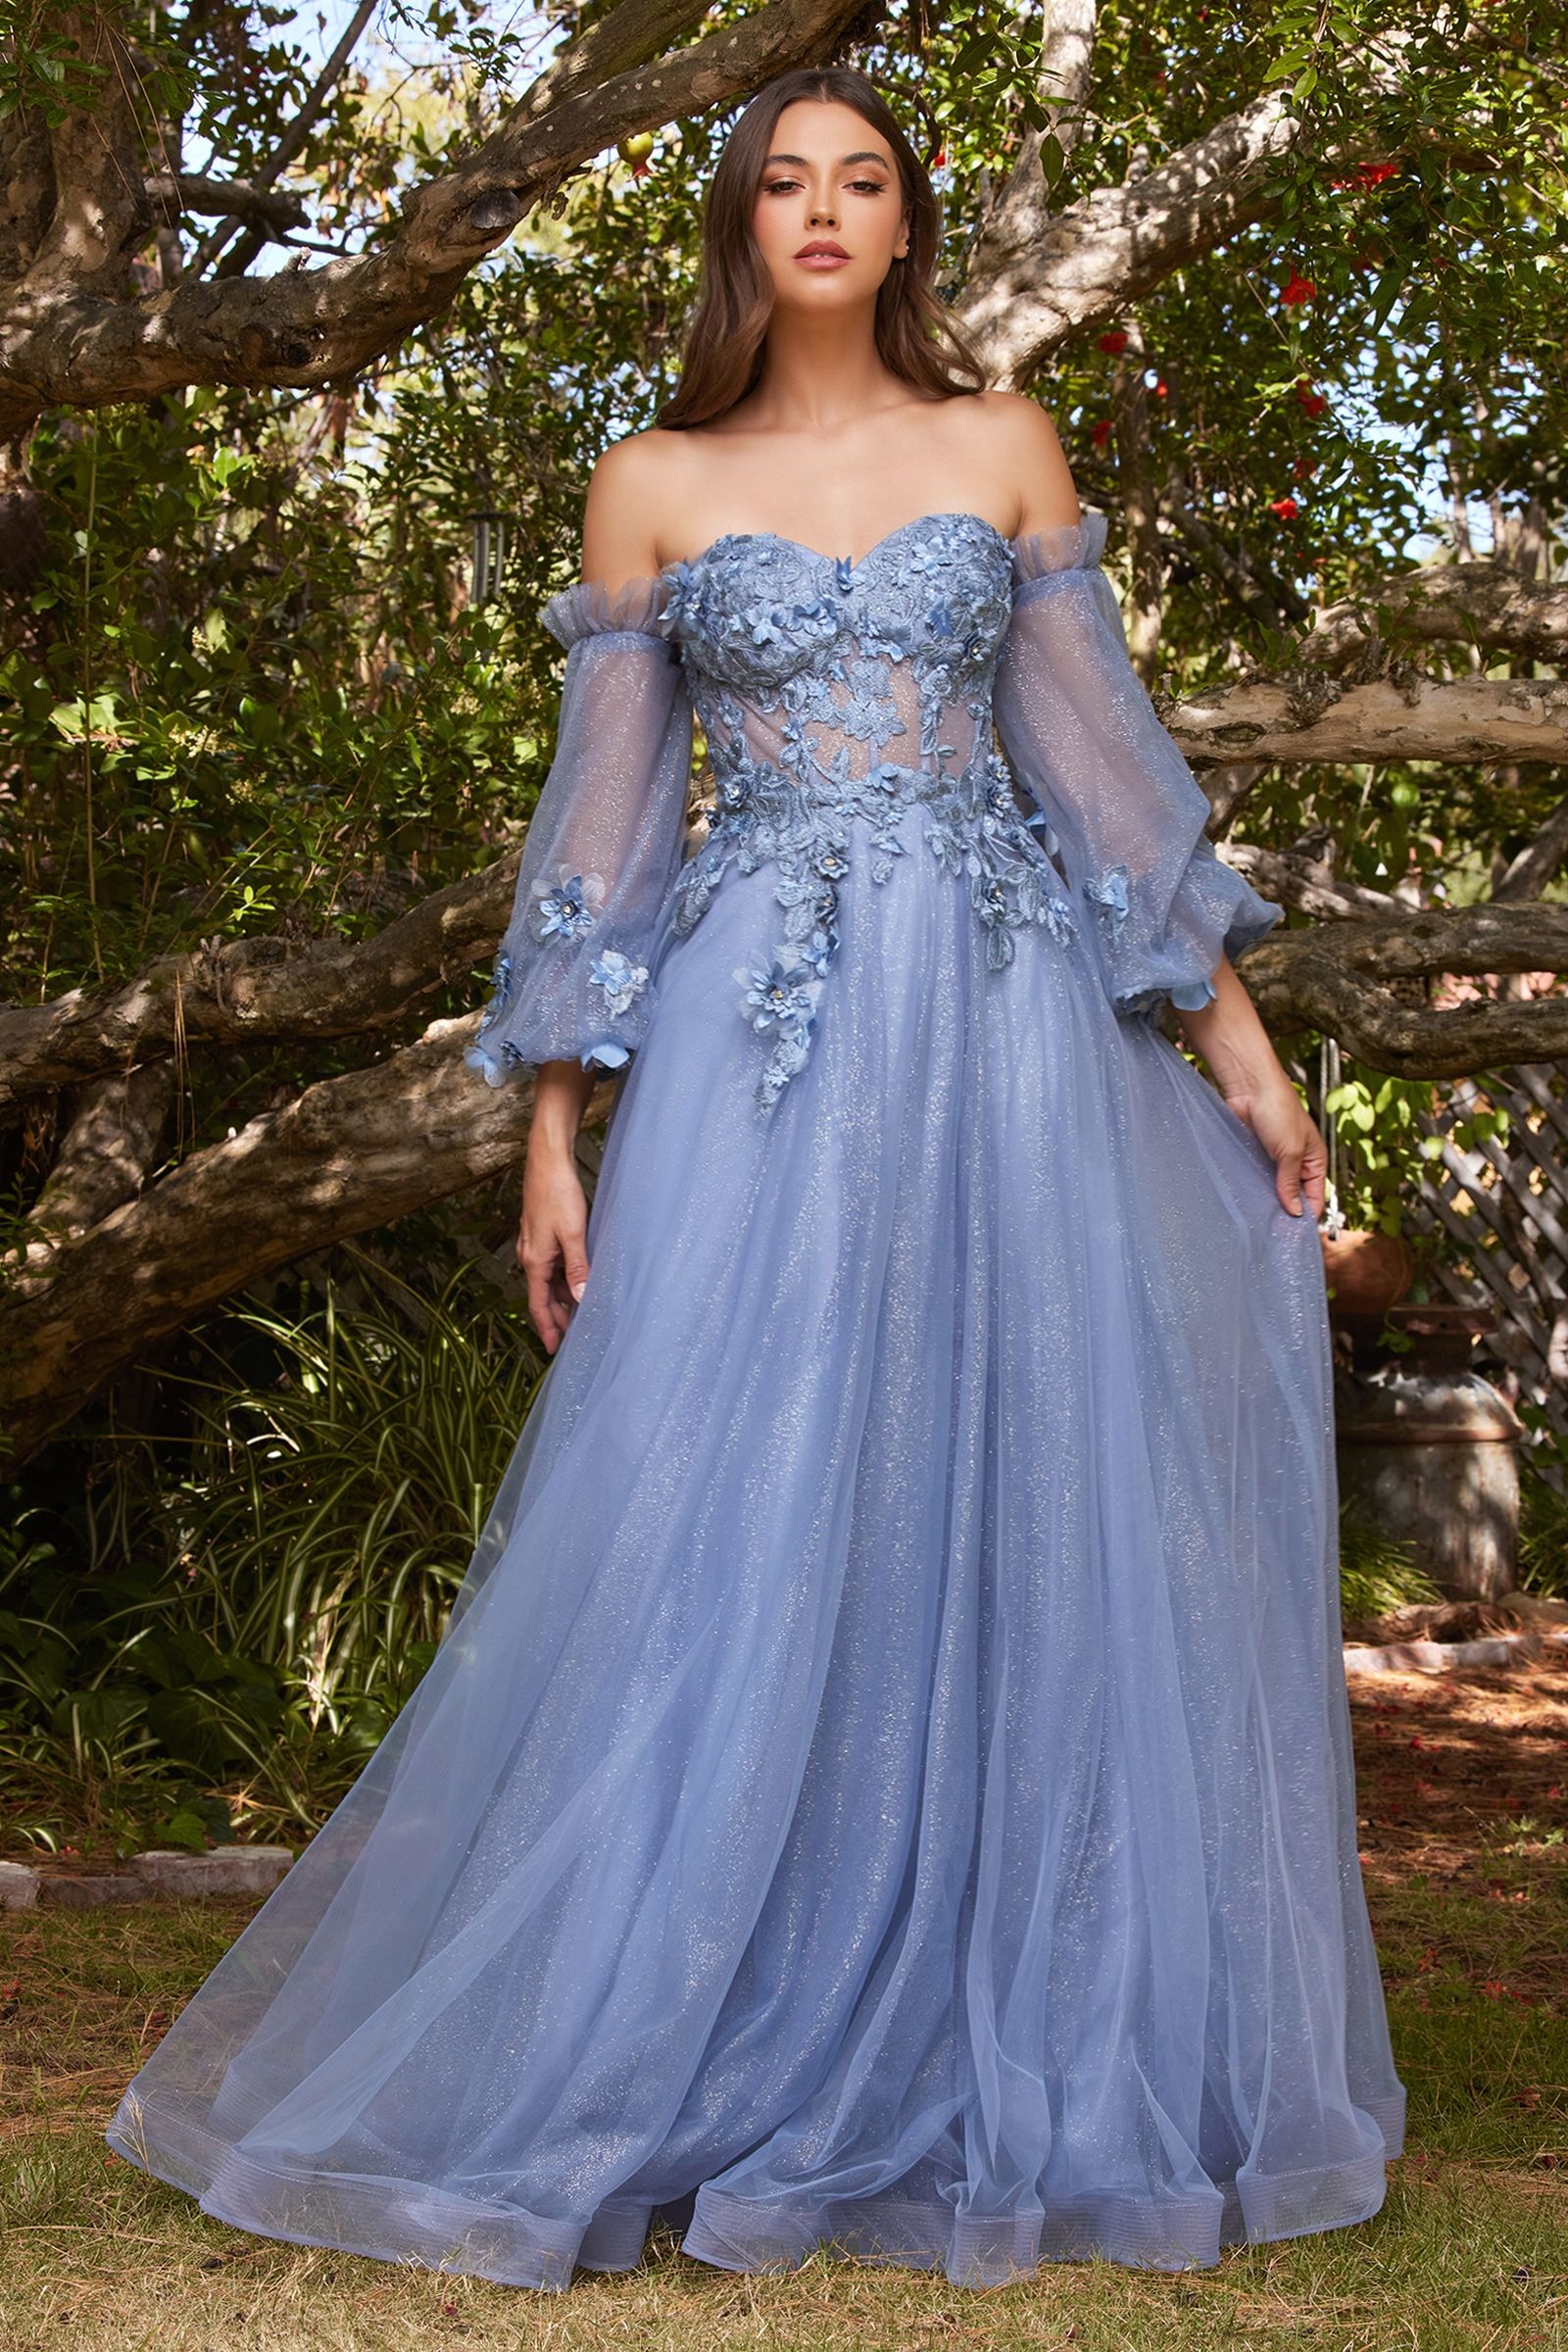 A princess floor-length gown featuring a sheer tulle corseted bodice